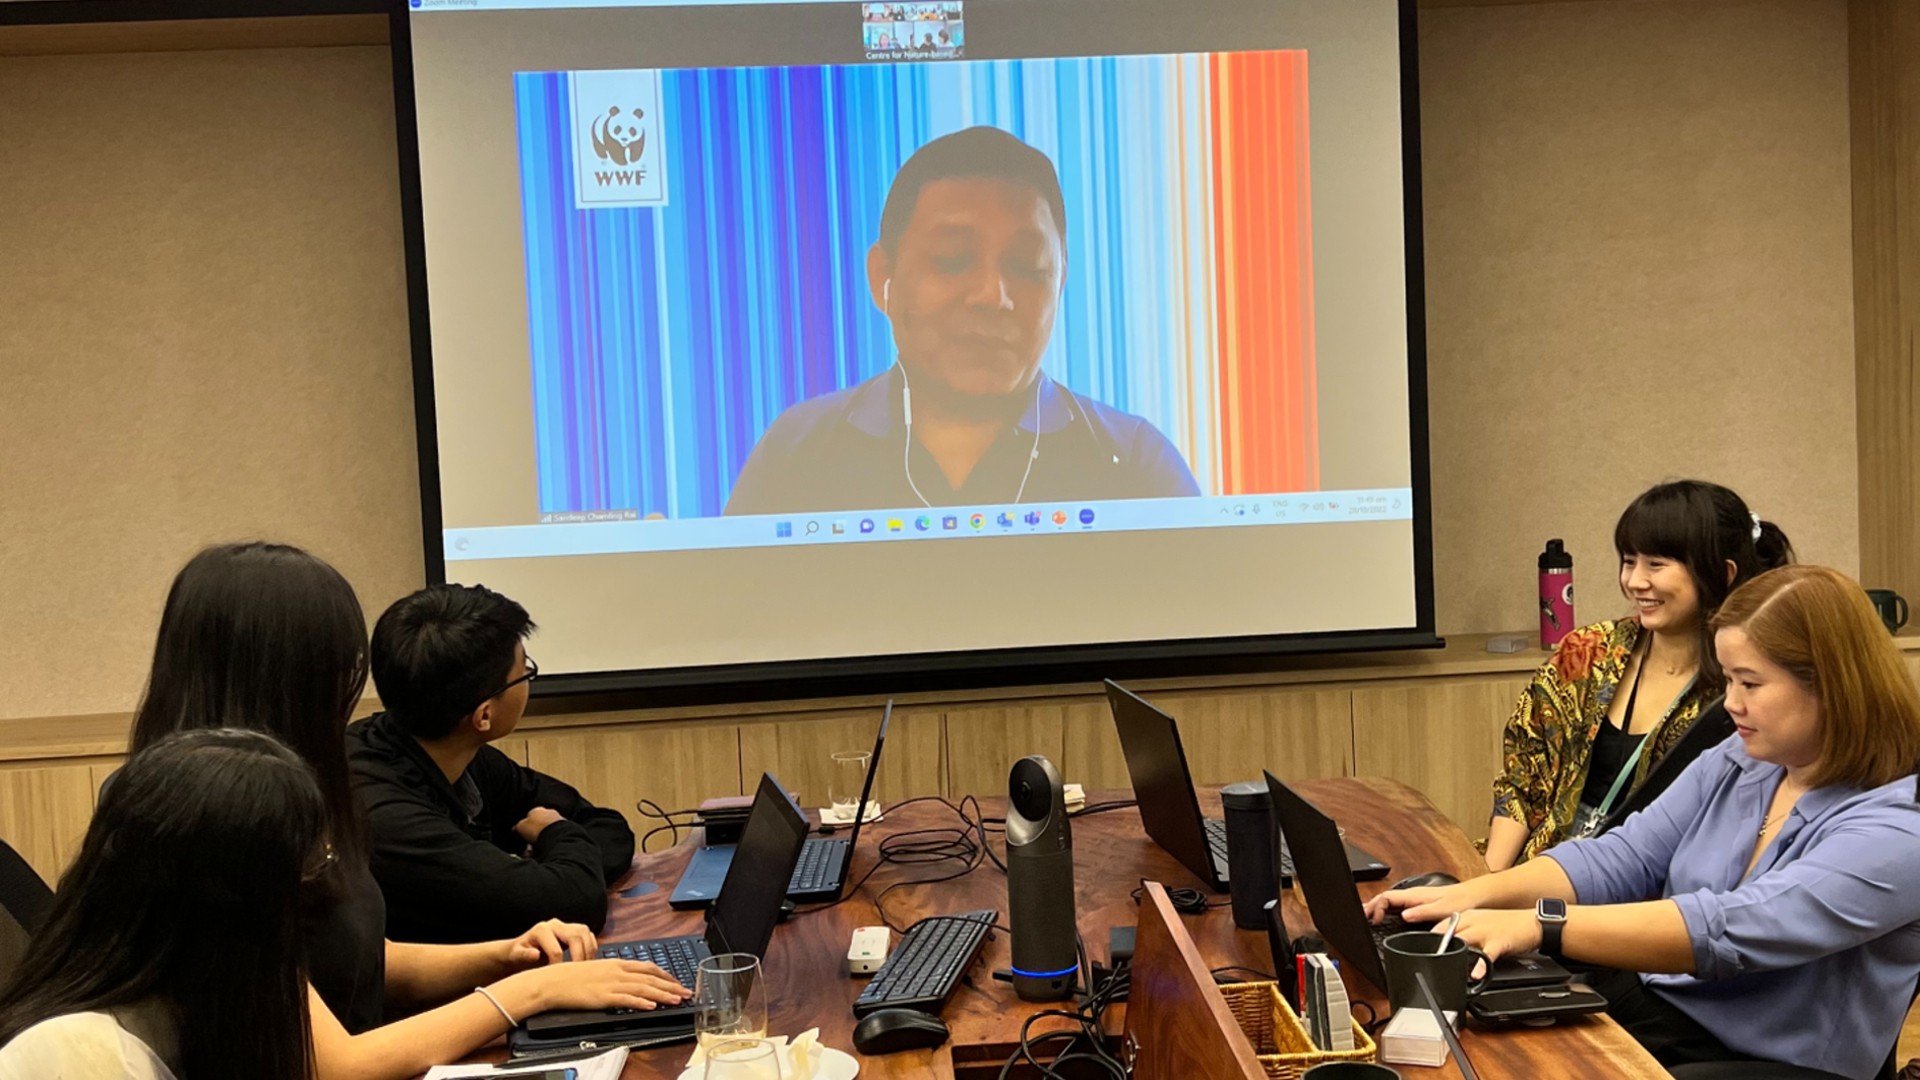 Mr Sandeep Rai from World Wildlife Fund (WWF) International joined the panel virtually to underscore the importance of climate finance for the region, and introduced loss and damage as two key issues of concern for Southeast Asia that will be discussed at COP27.